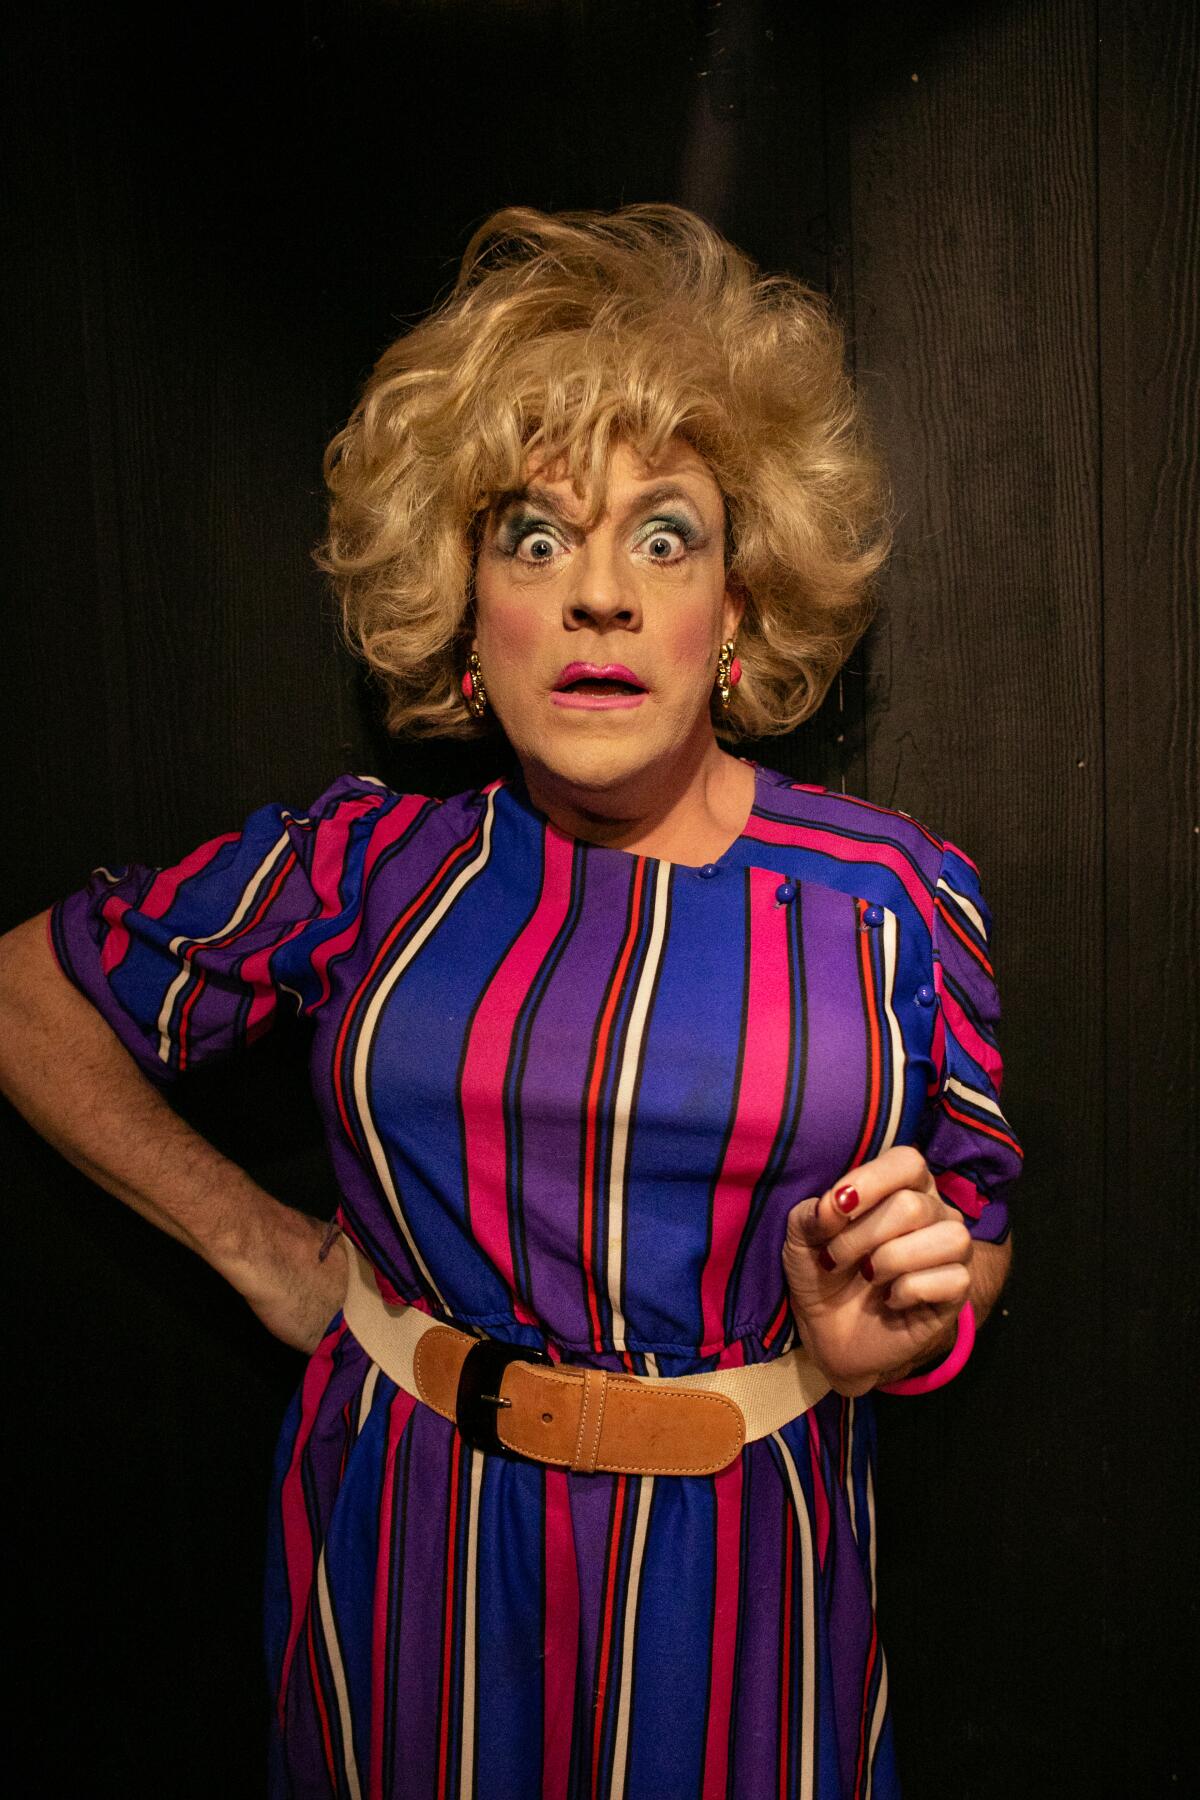 Drew Droege starred as Rose Nylund in "Golden Girlz Live" at Cavern Club Theater